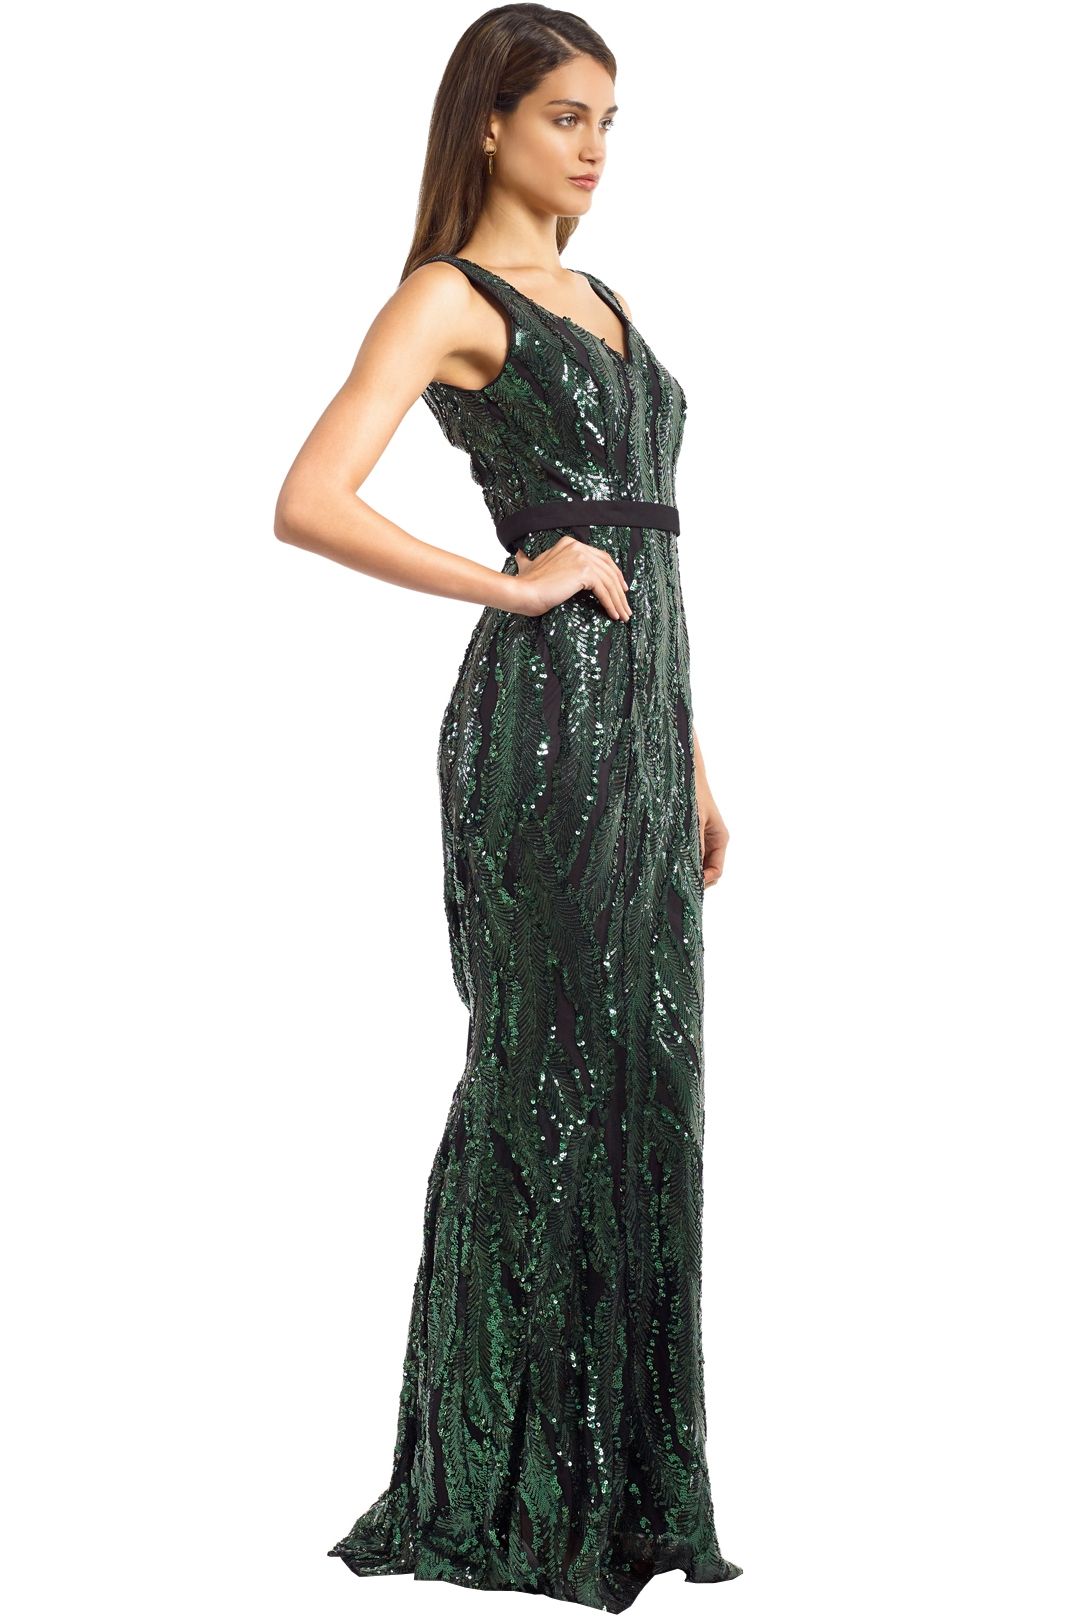 Jadore - J9027 - Aria Gown - Forest - Side